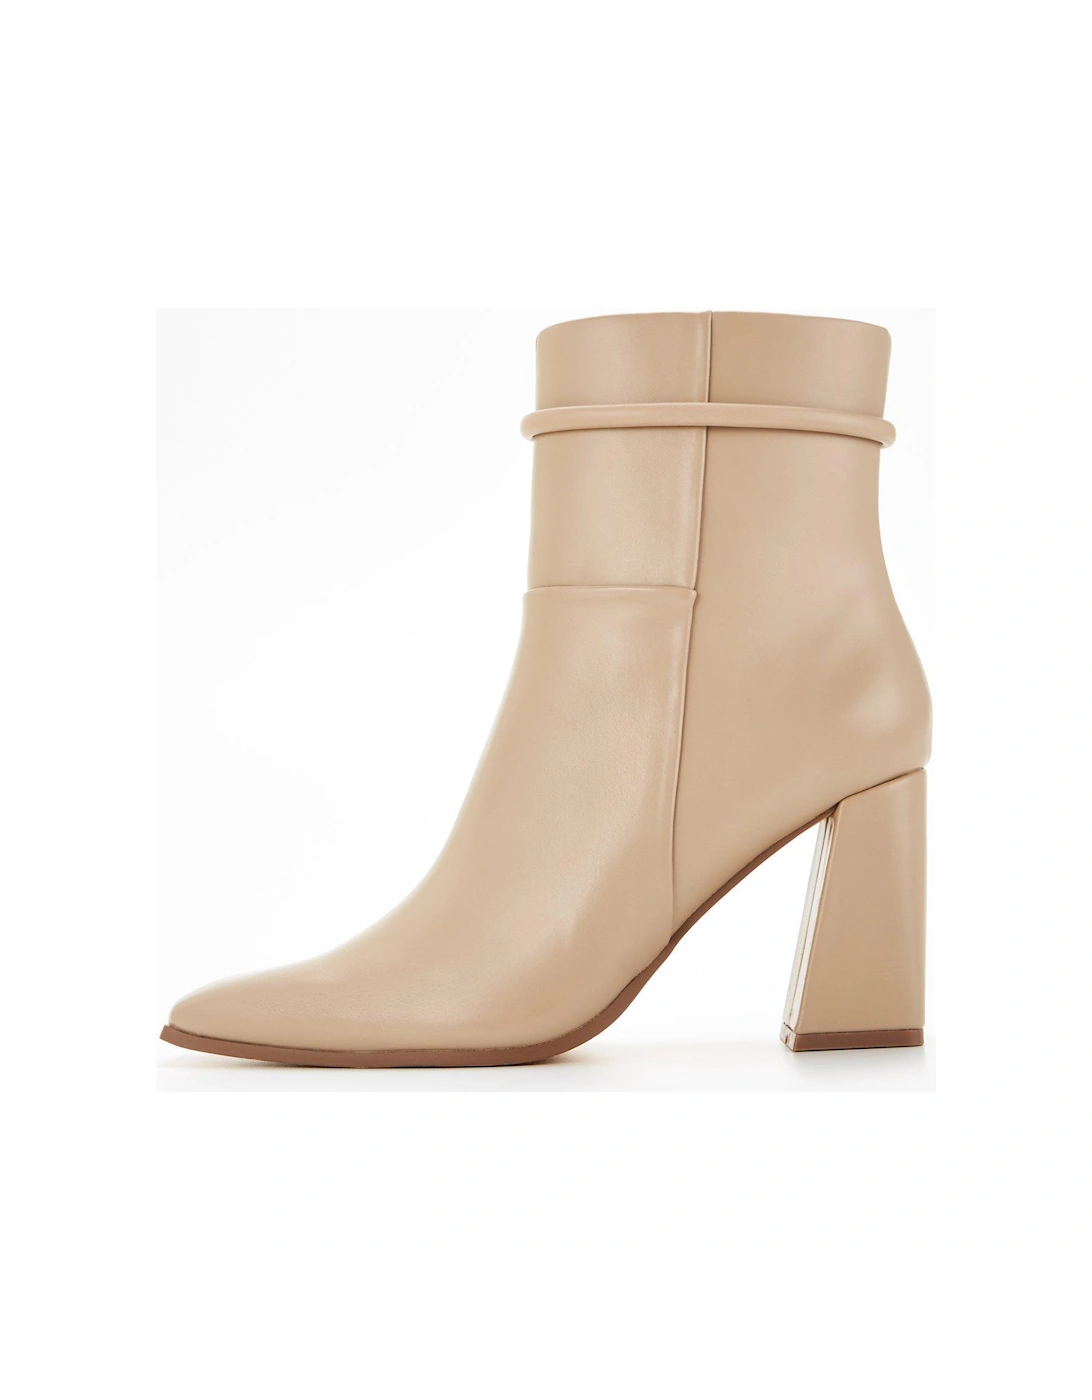 Square Toe Flare Heel Ankle Boot - Cream, 7 of 6